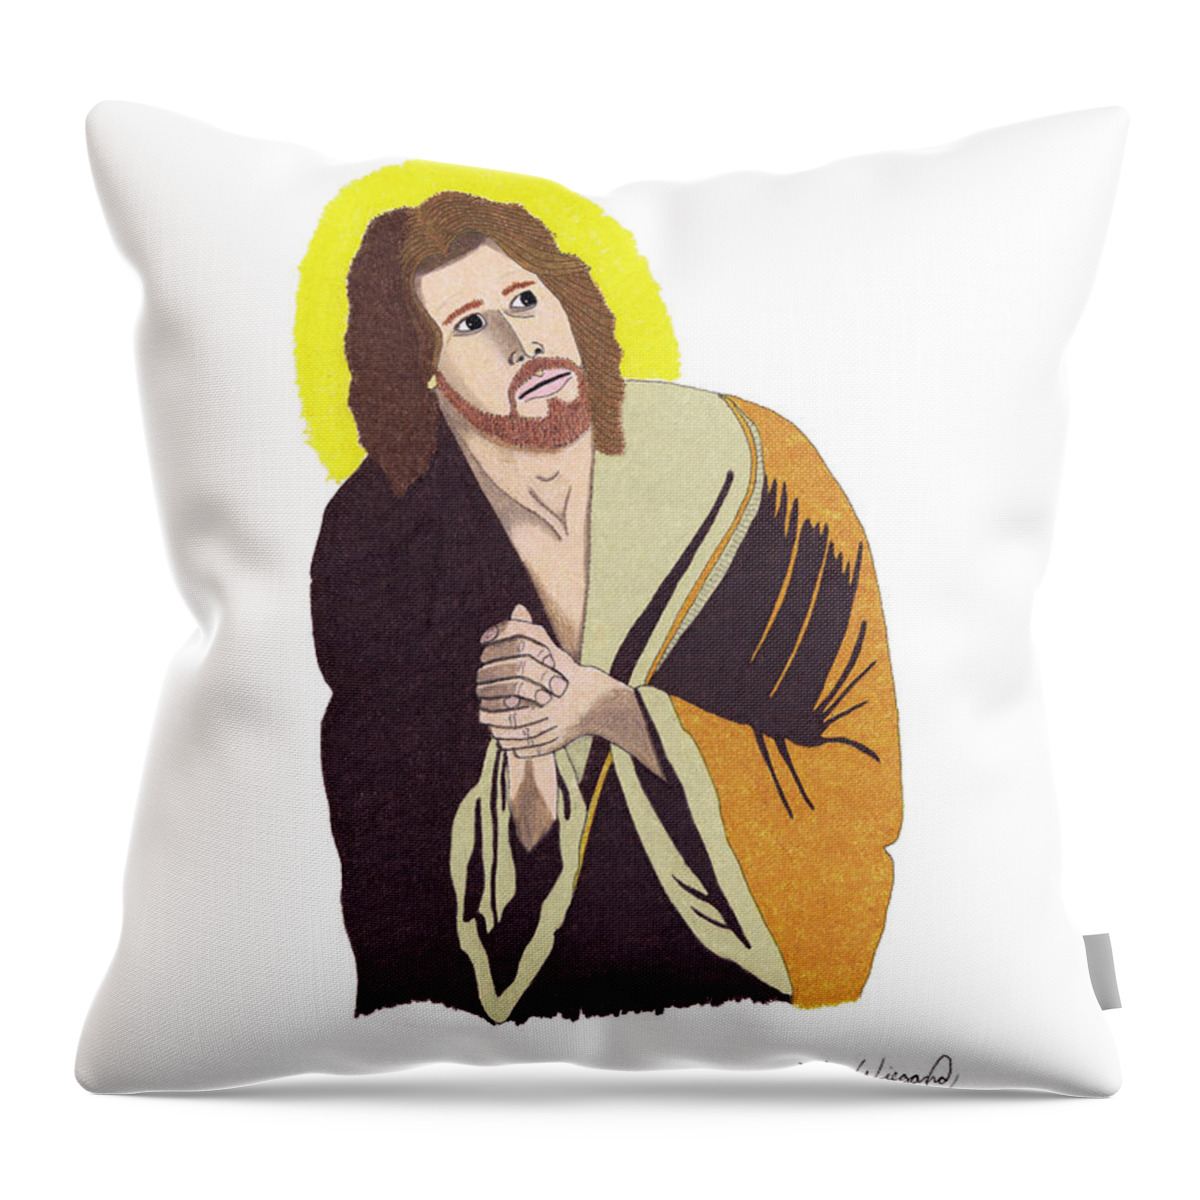 Prayer Throw Pillow featuring the drawing Keeping Our Eyes On Him by John Wiegand